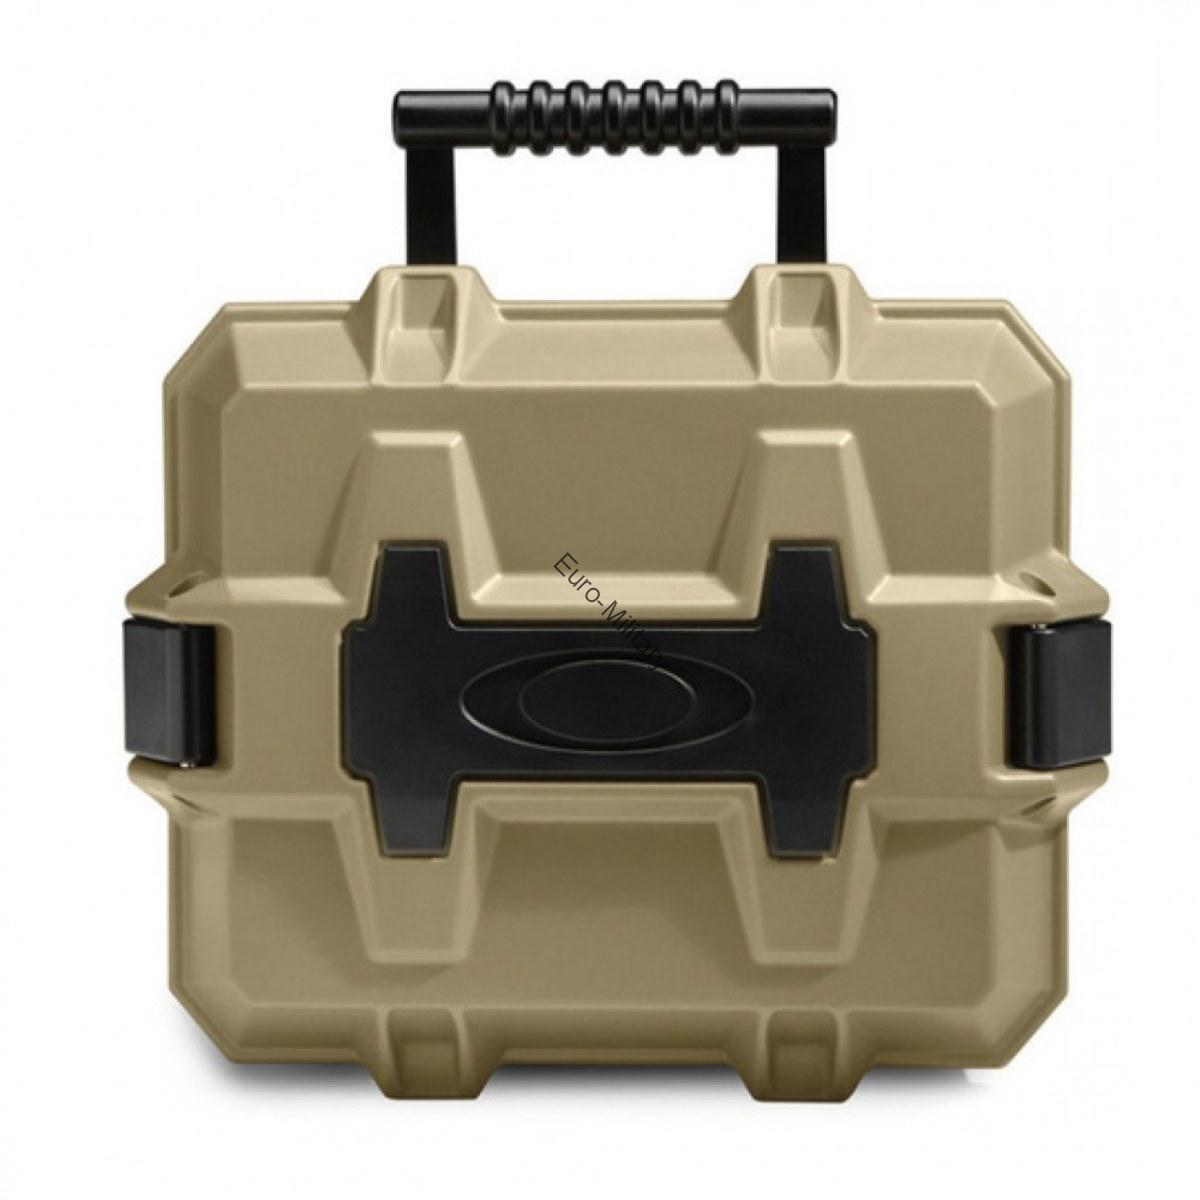 Oakley® Standard Issue STRONG Glasses CARRY BOX - Terrain Tan